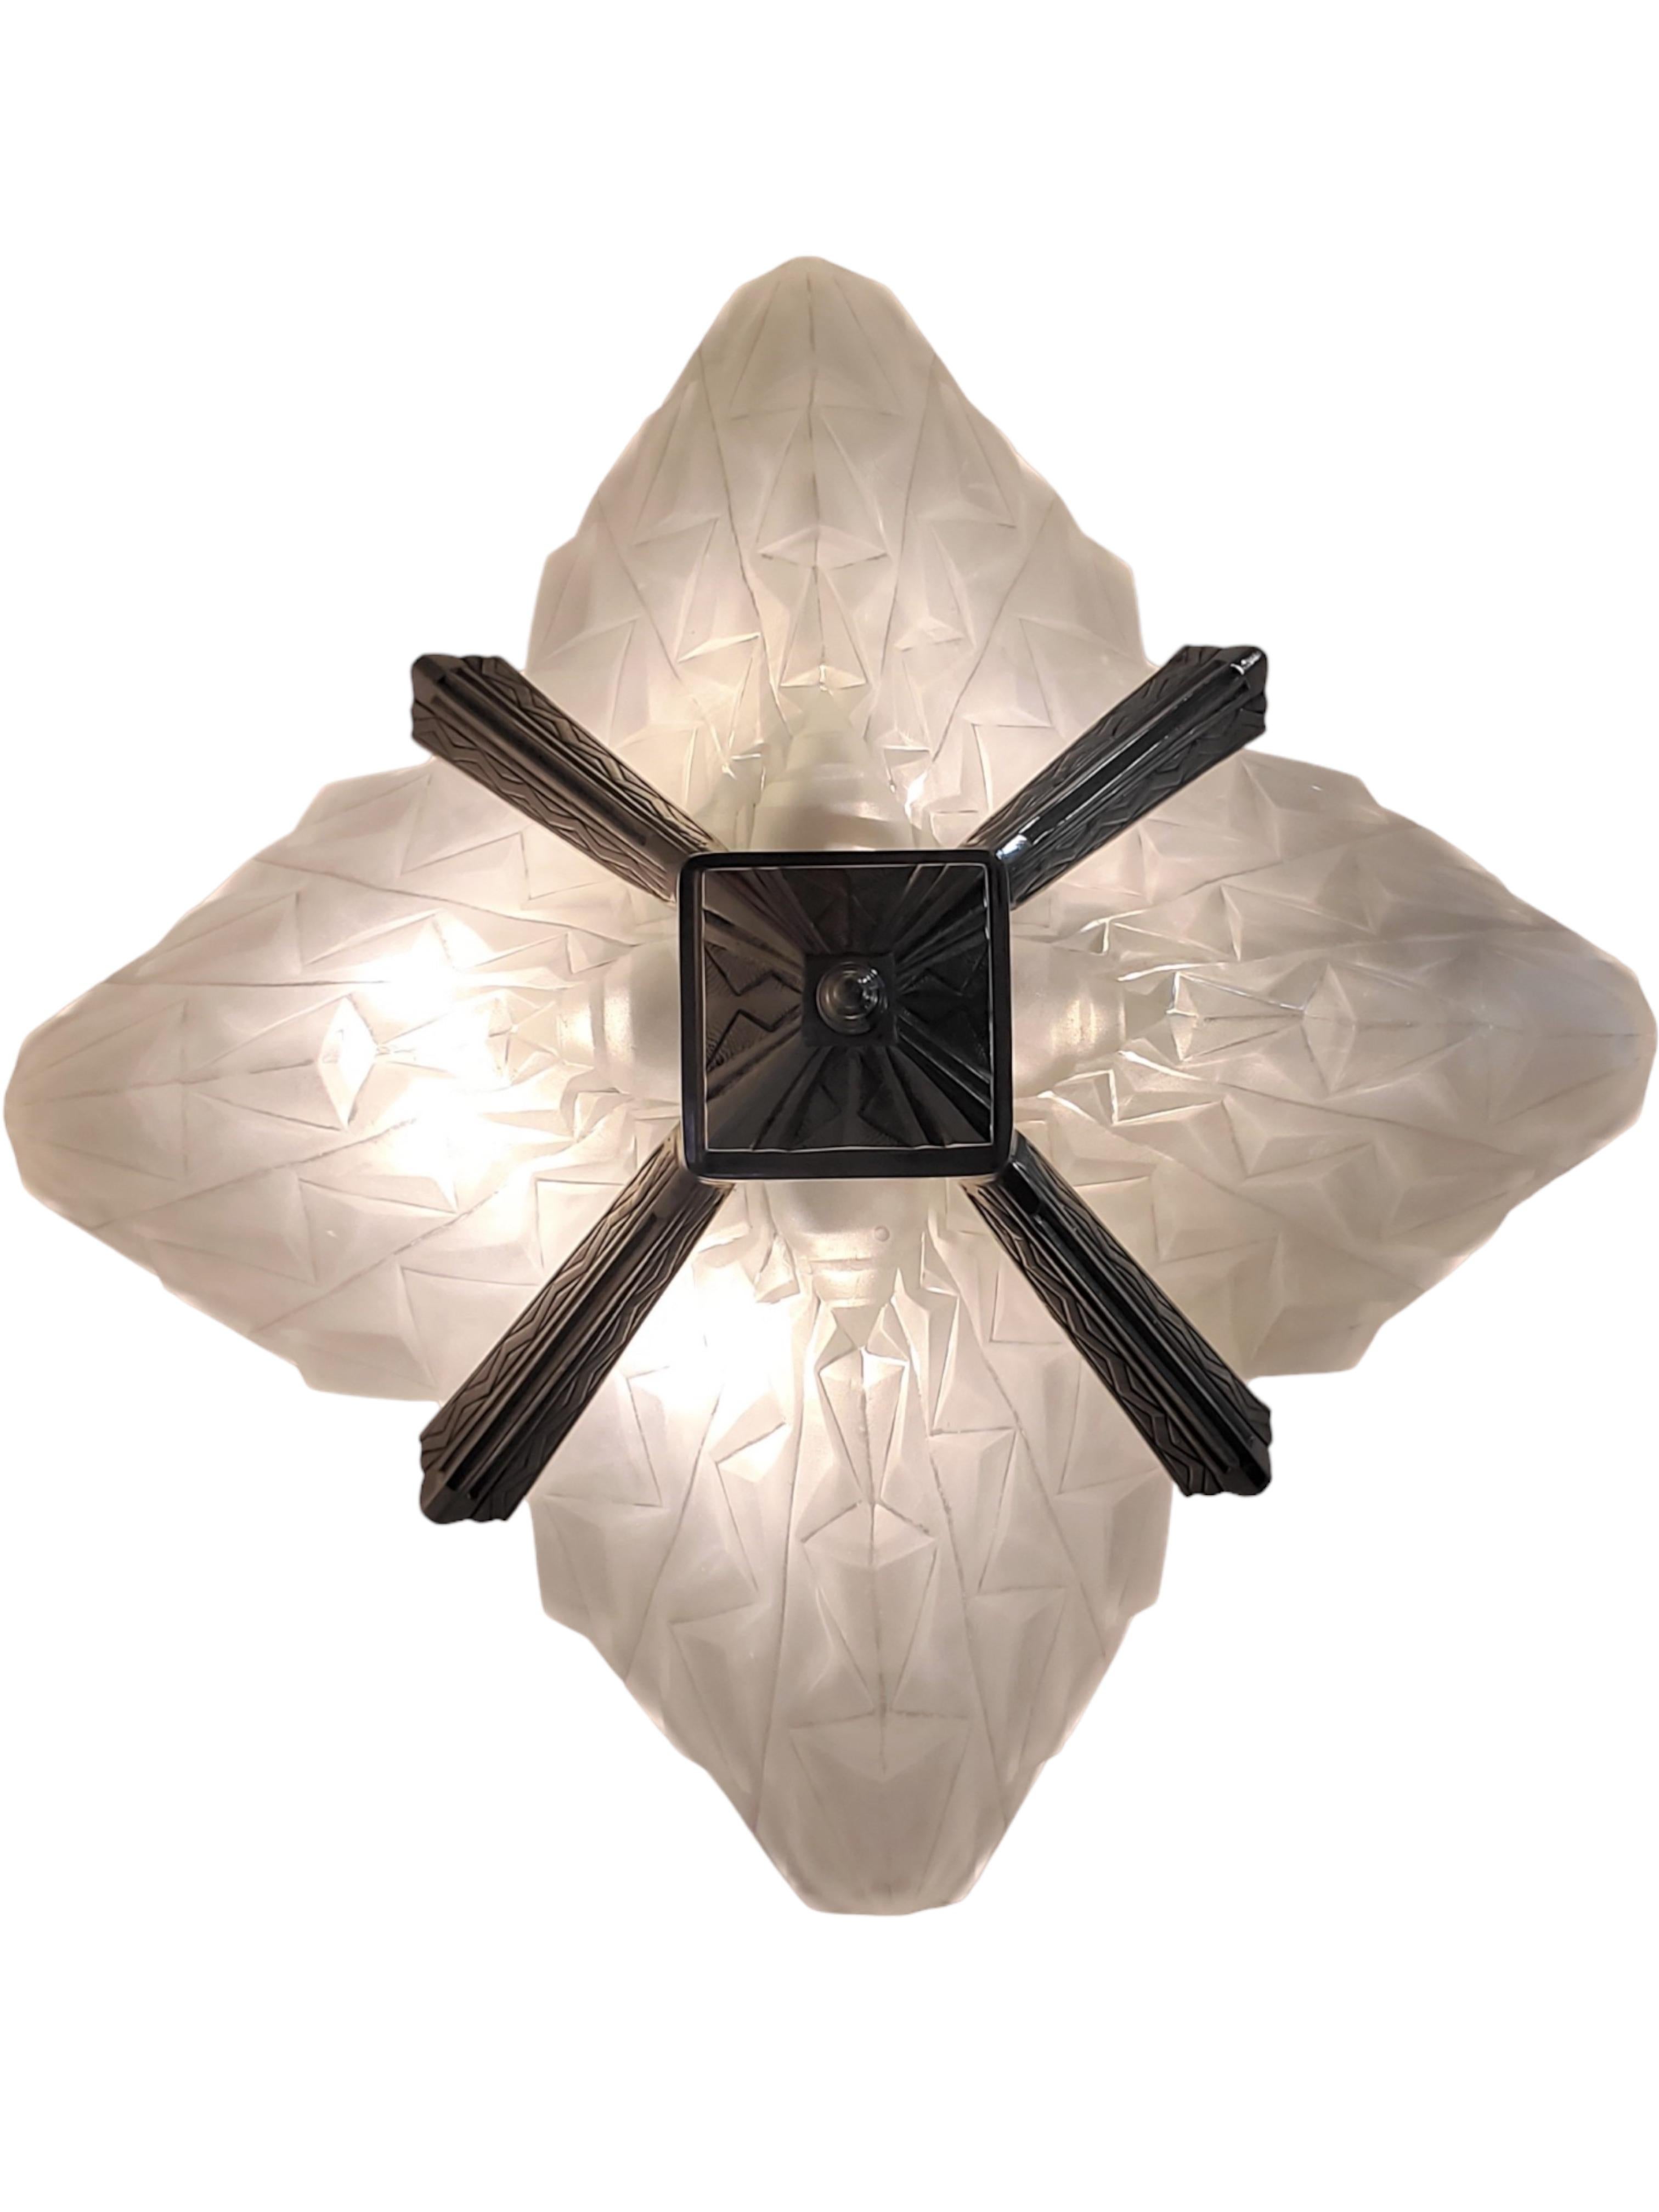 Bronze French Art Deco original 4 panel geometric frosted art glass chandelier by Degue For Sale